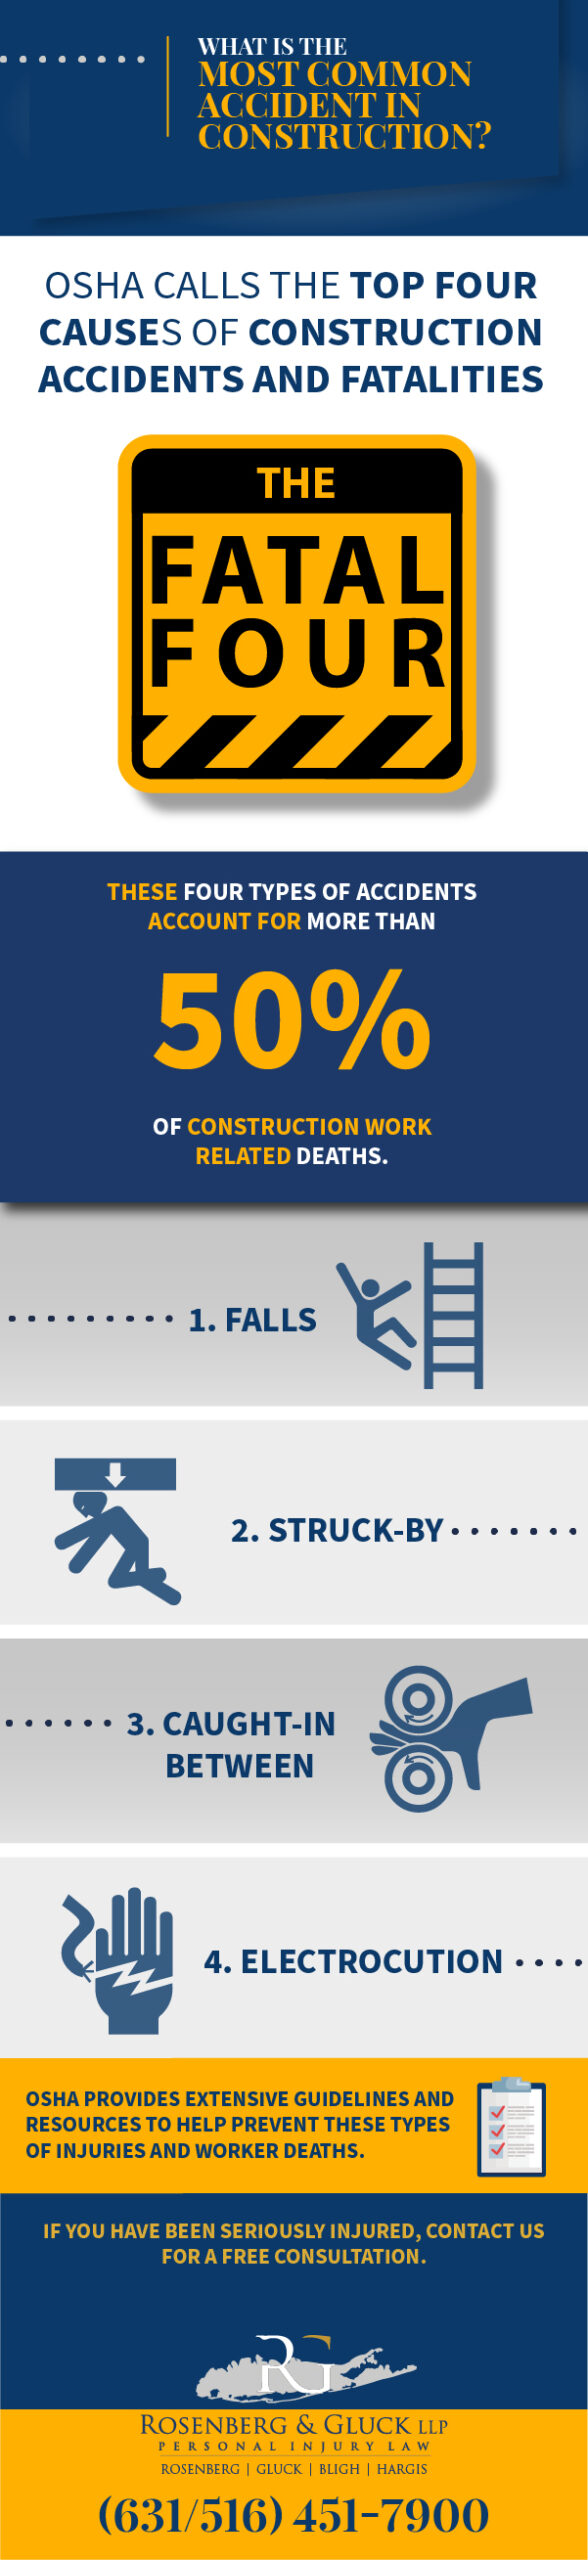 What is the Most Common Accident in Construction?